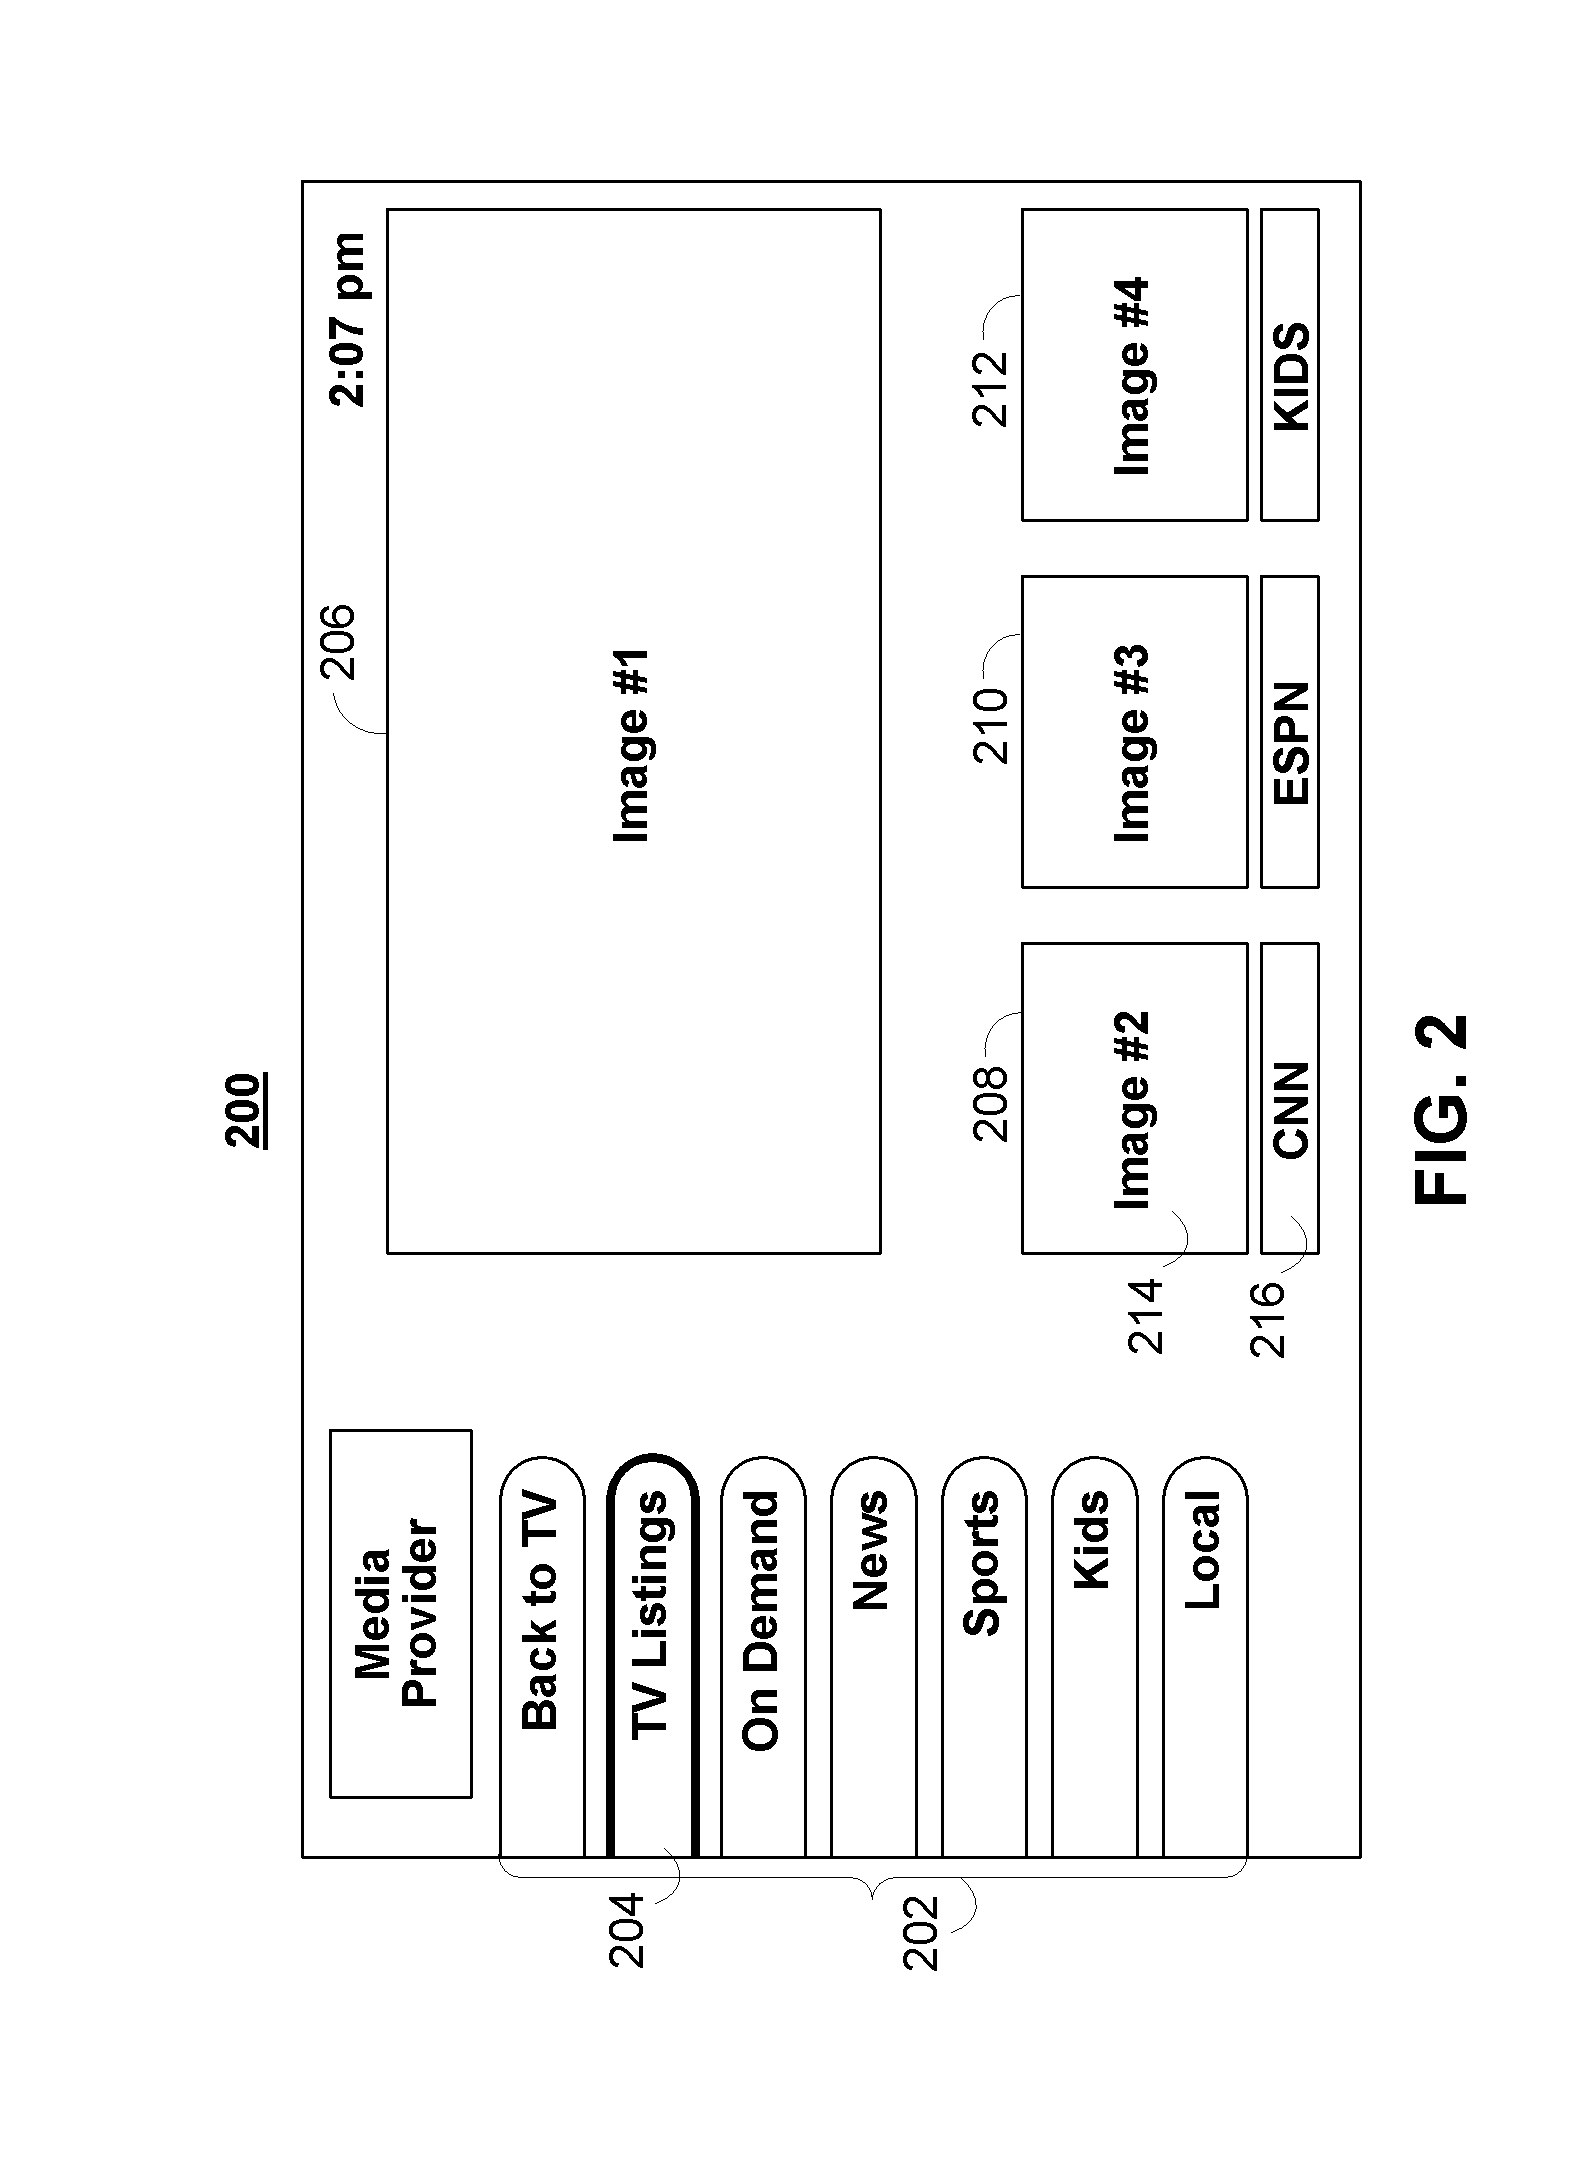 Systems and methods for providing remote program ordering on a user device via a web server